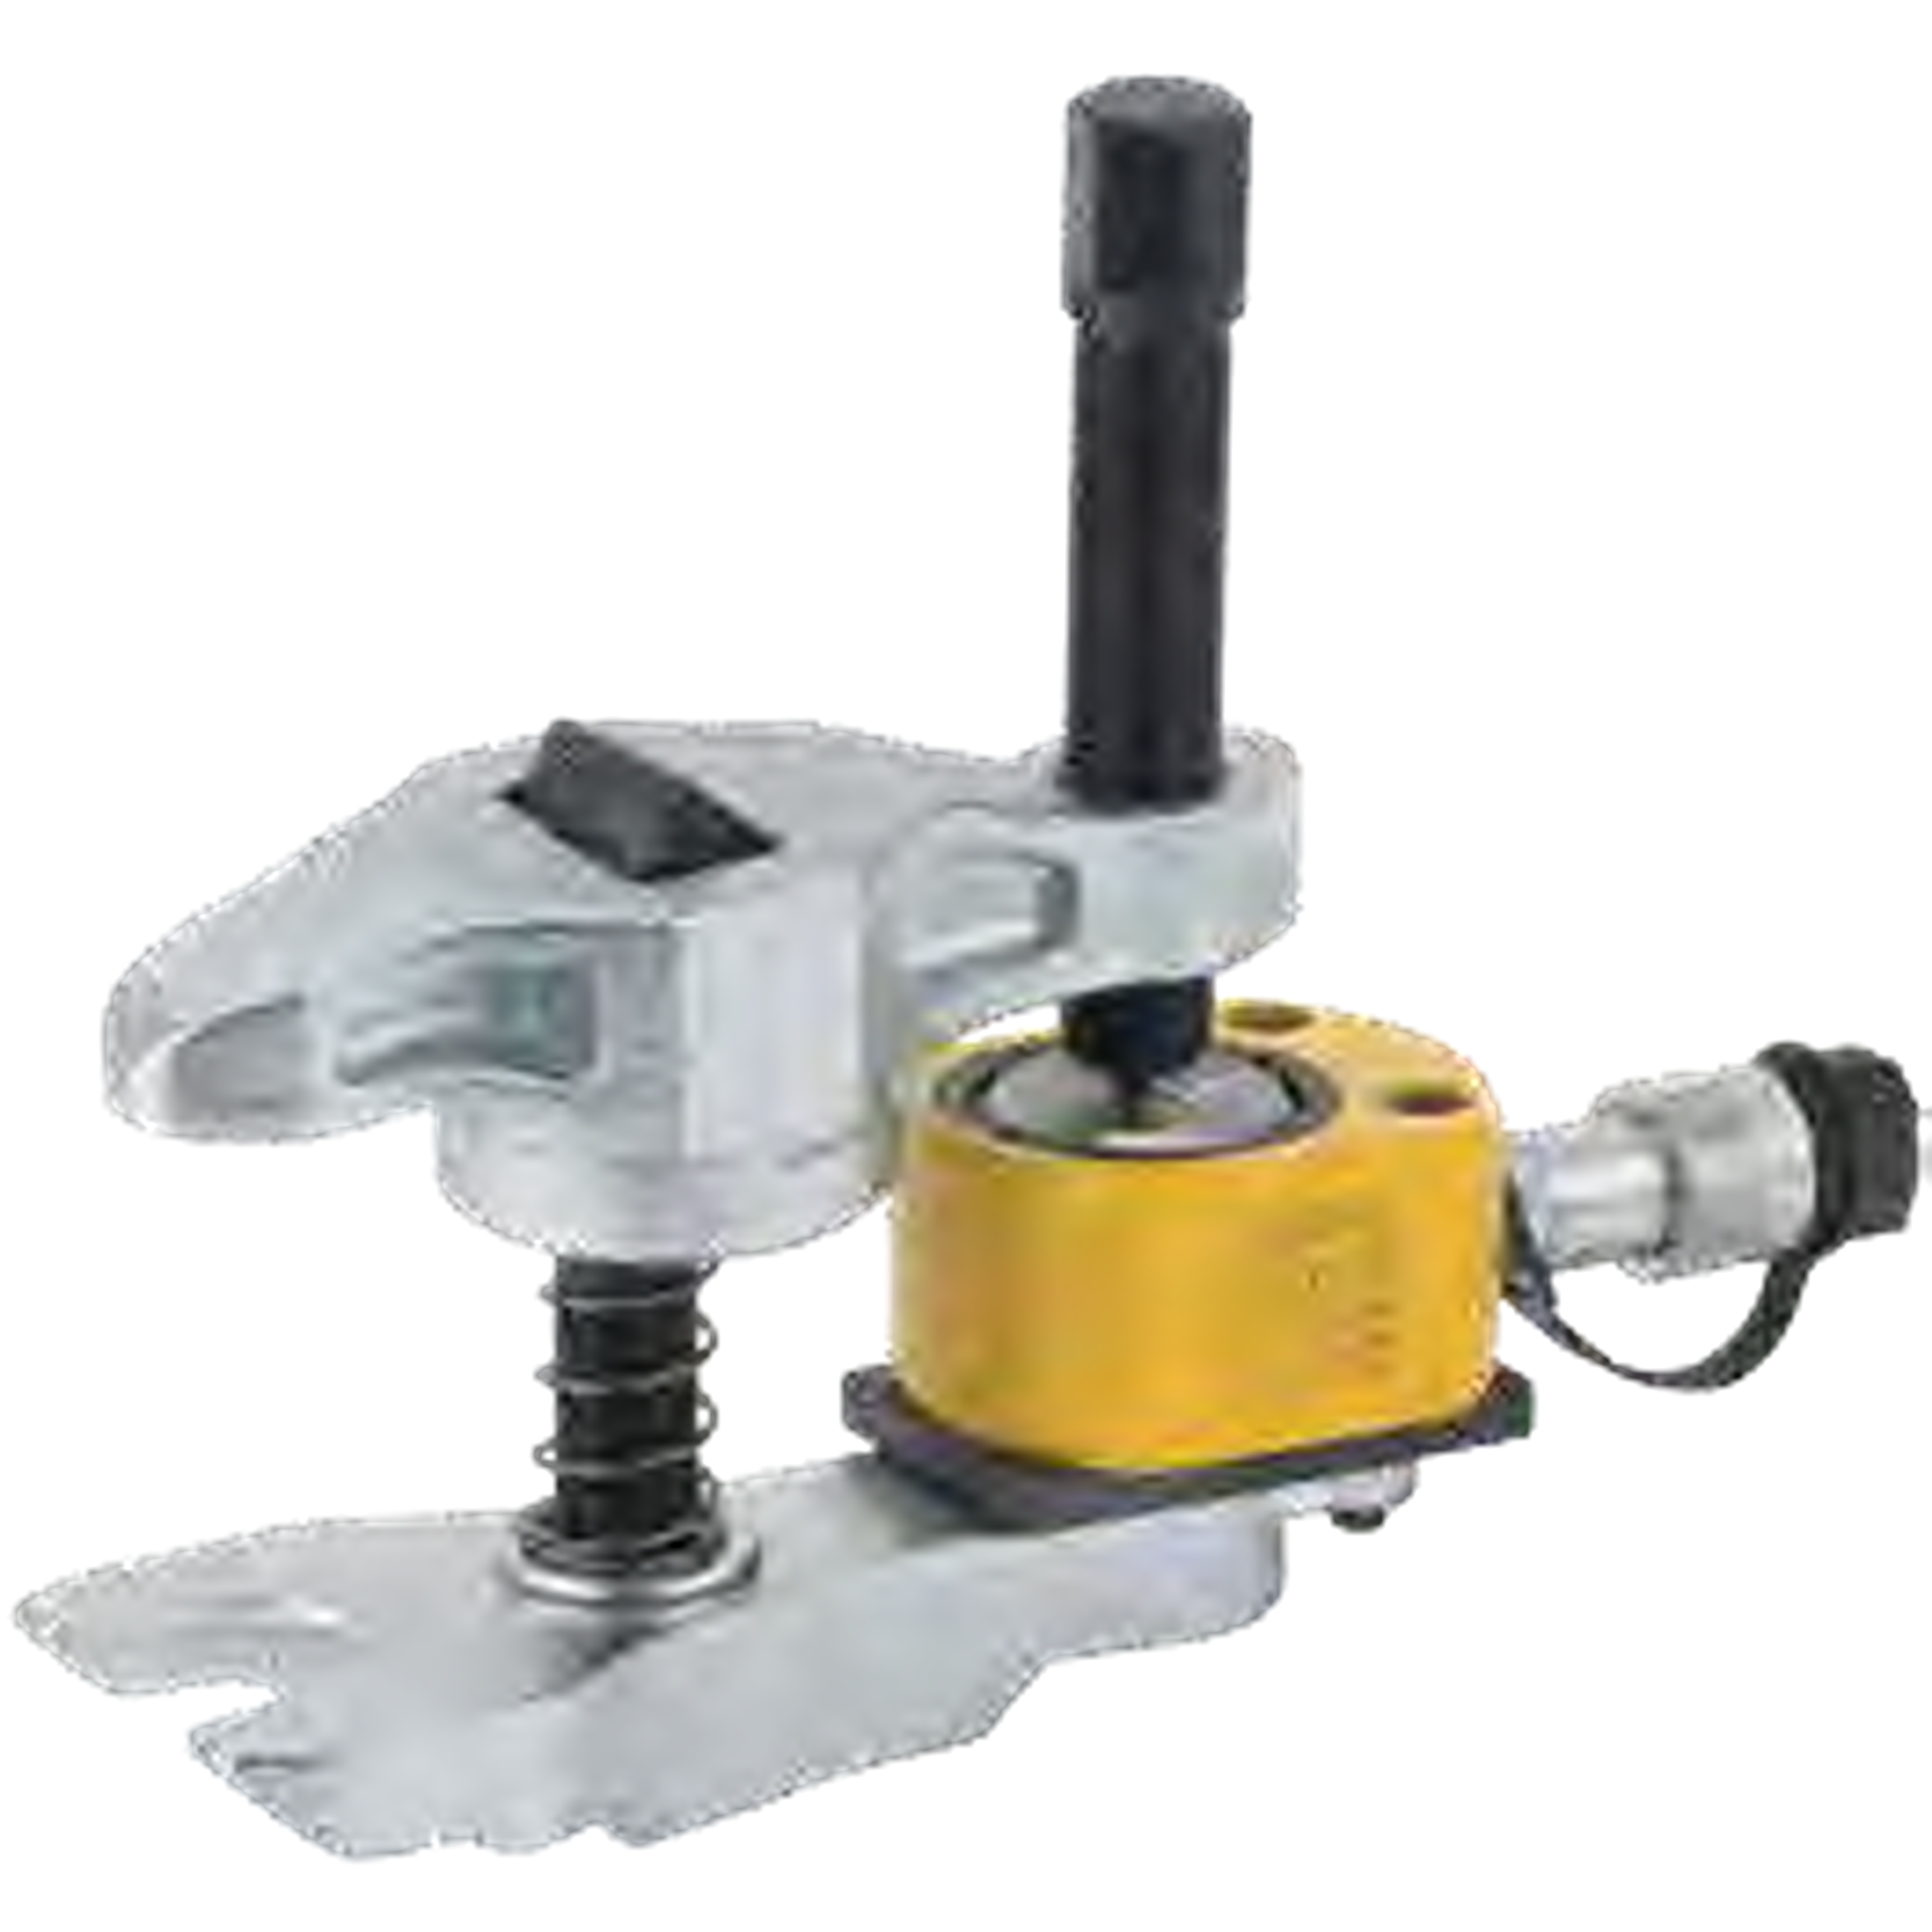 NEXUS HM169-5 Ball Joint Extractor For Heavy Trucks And Buses - Premium Ball Joint Extractor from NEXUS - Shop now at Yew Aik.